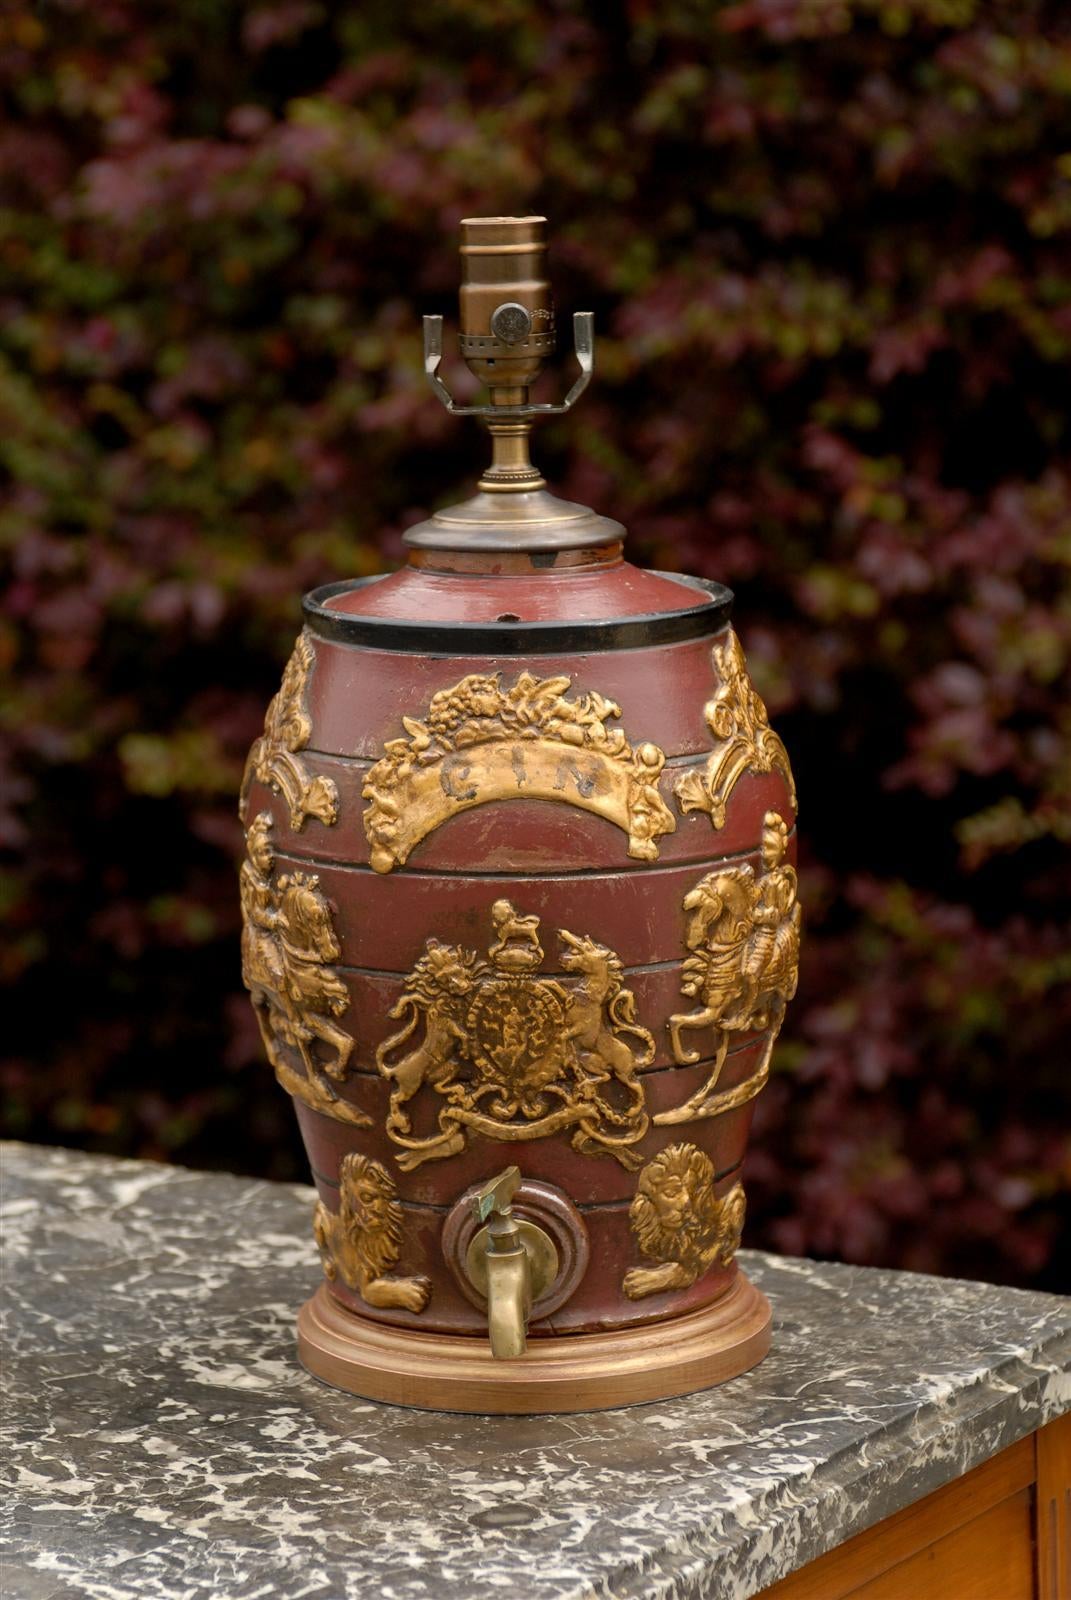 An English late 19th century spirit barrel with raised gilded motifs, Gin label and brass spigot made into a table lamp. This English spirit barrel lamp features a red body, exquisitely adorned with the label Gin at the top and the United Kingdom’s